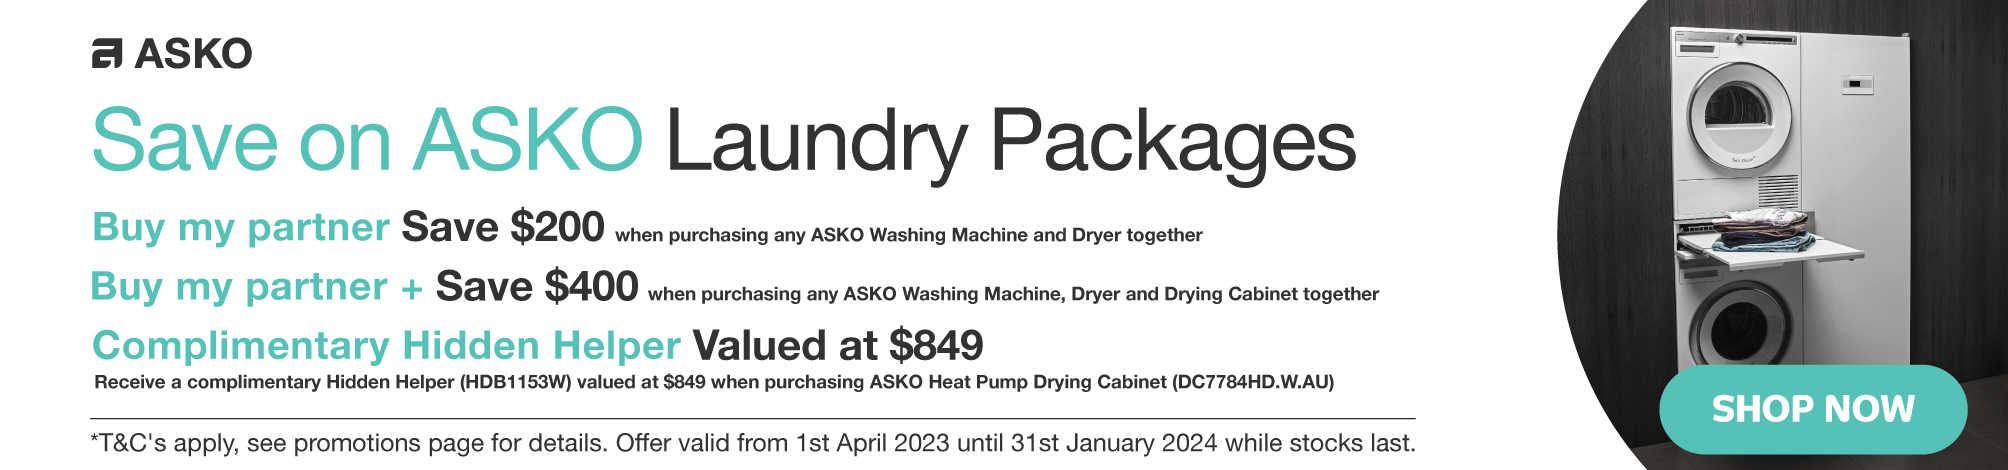 Asko Buy My Partner - Save Up To $400 On Laundry Packages With Complimentary Hidden Helper